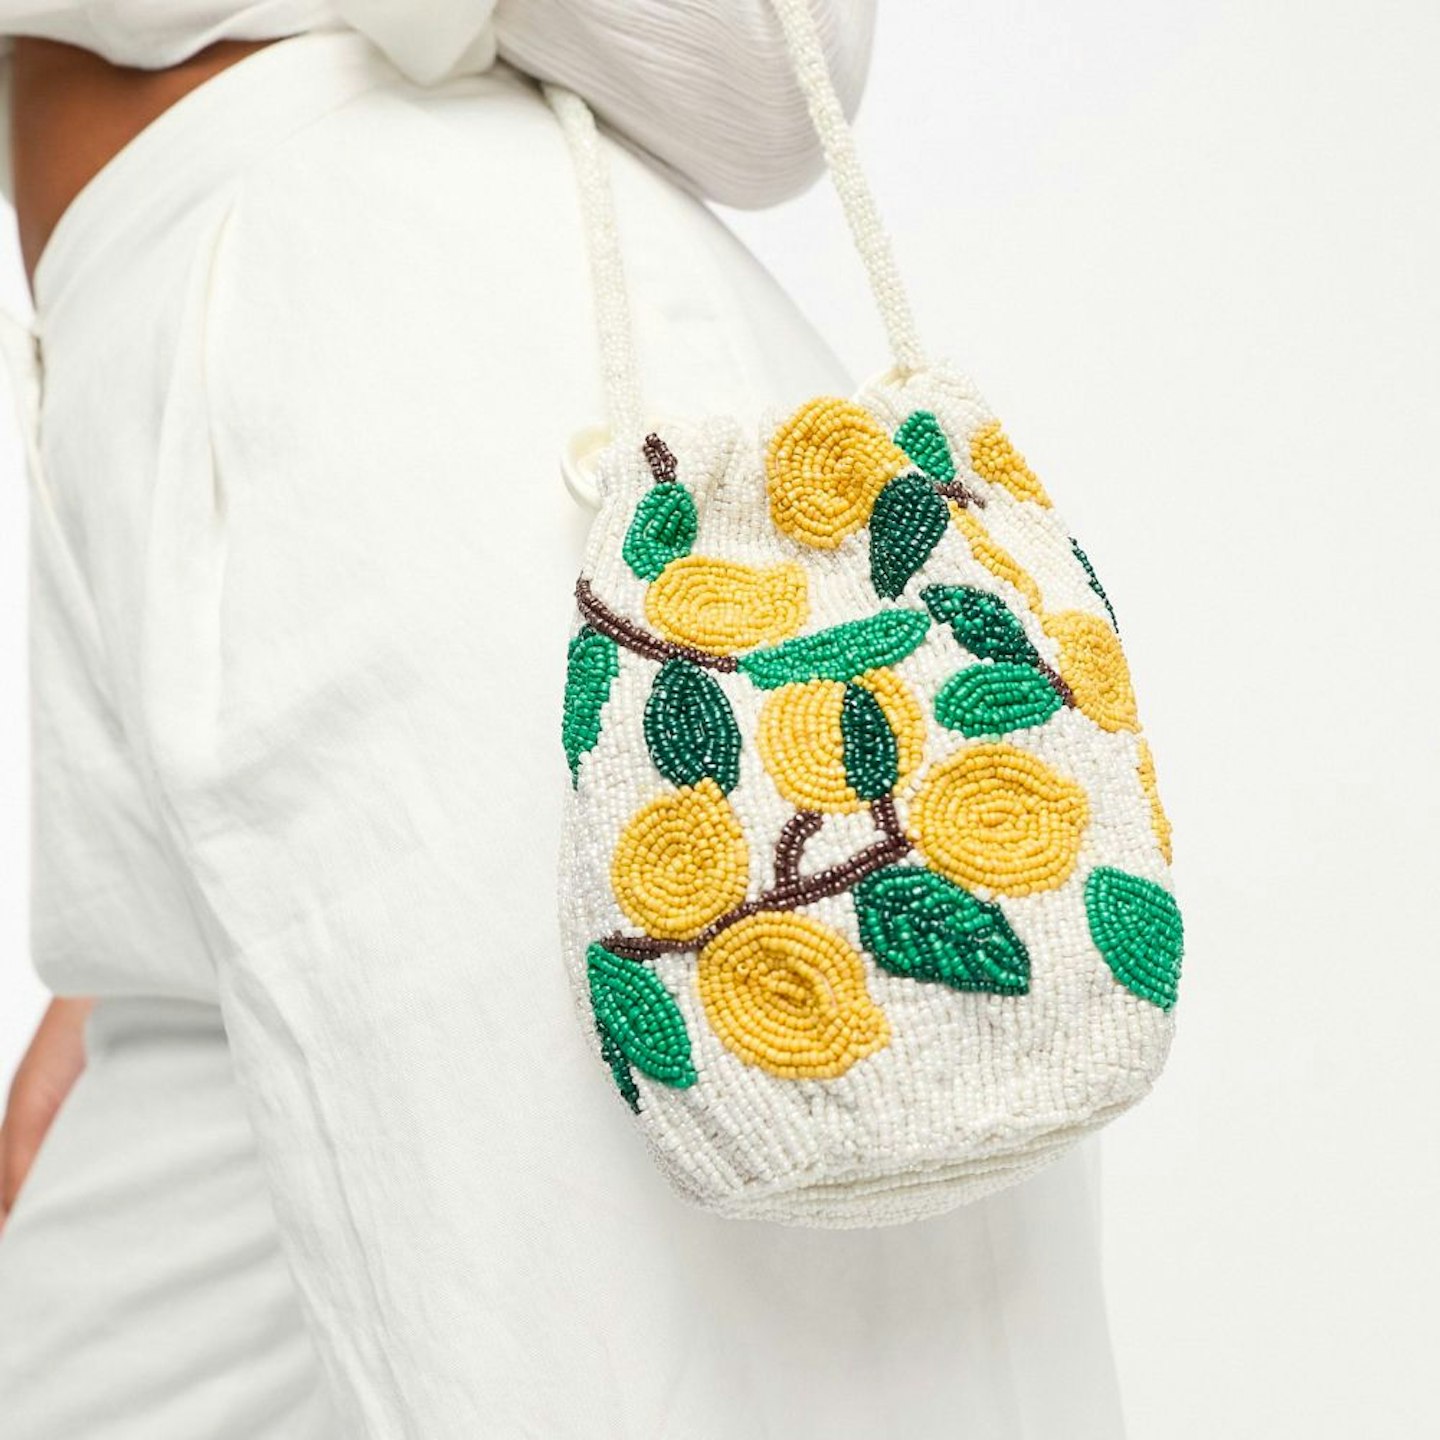 Accessorize mini beaded fruit drawstring bag in yellow and white